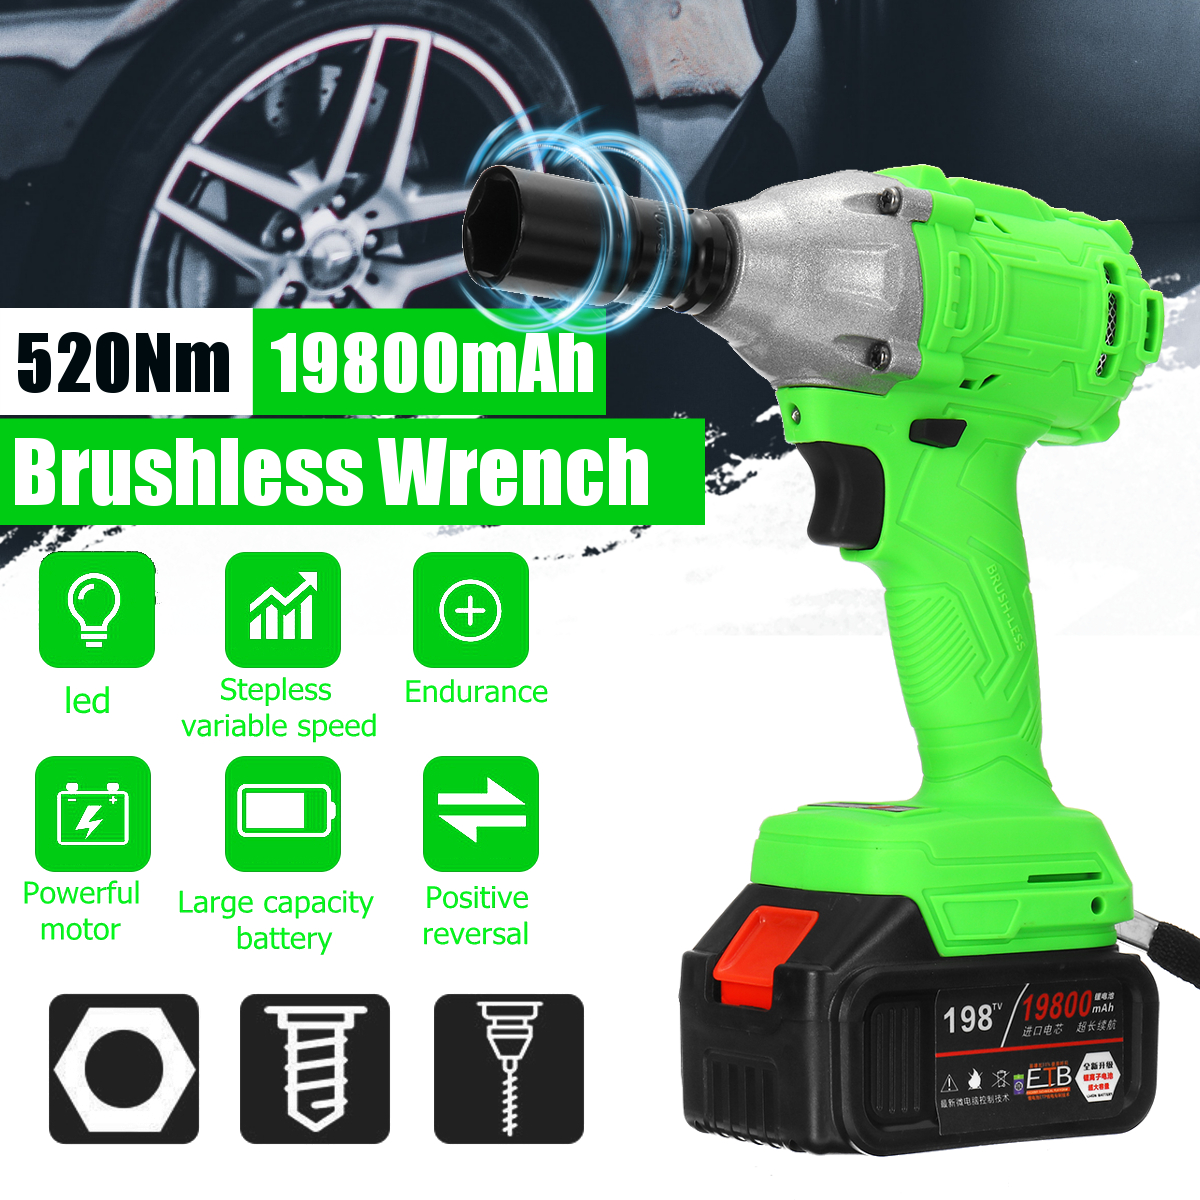 520Nm-198TV-19800mAh-Electric-Cordless-Impact-Wrench-Driver-Tool-12quot-Ratchet-Drive-Sockets-1618429-10